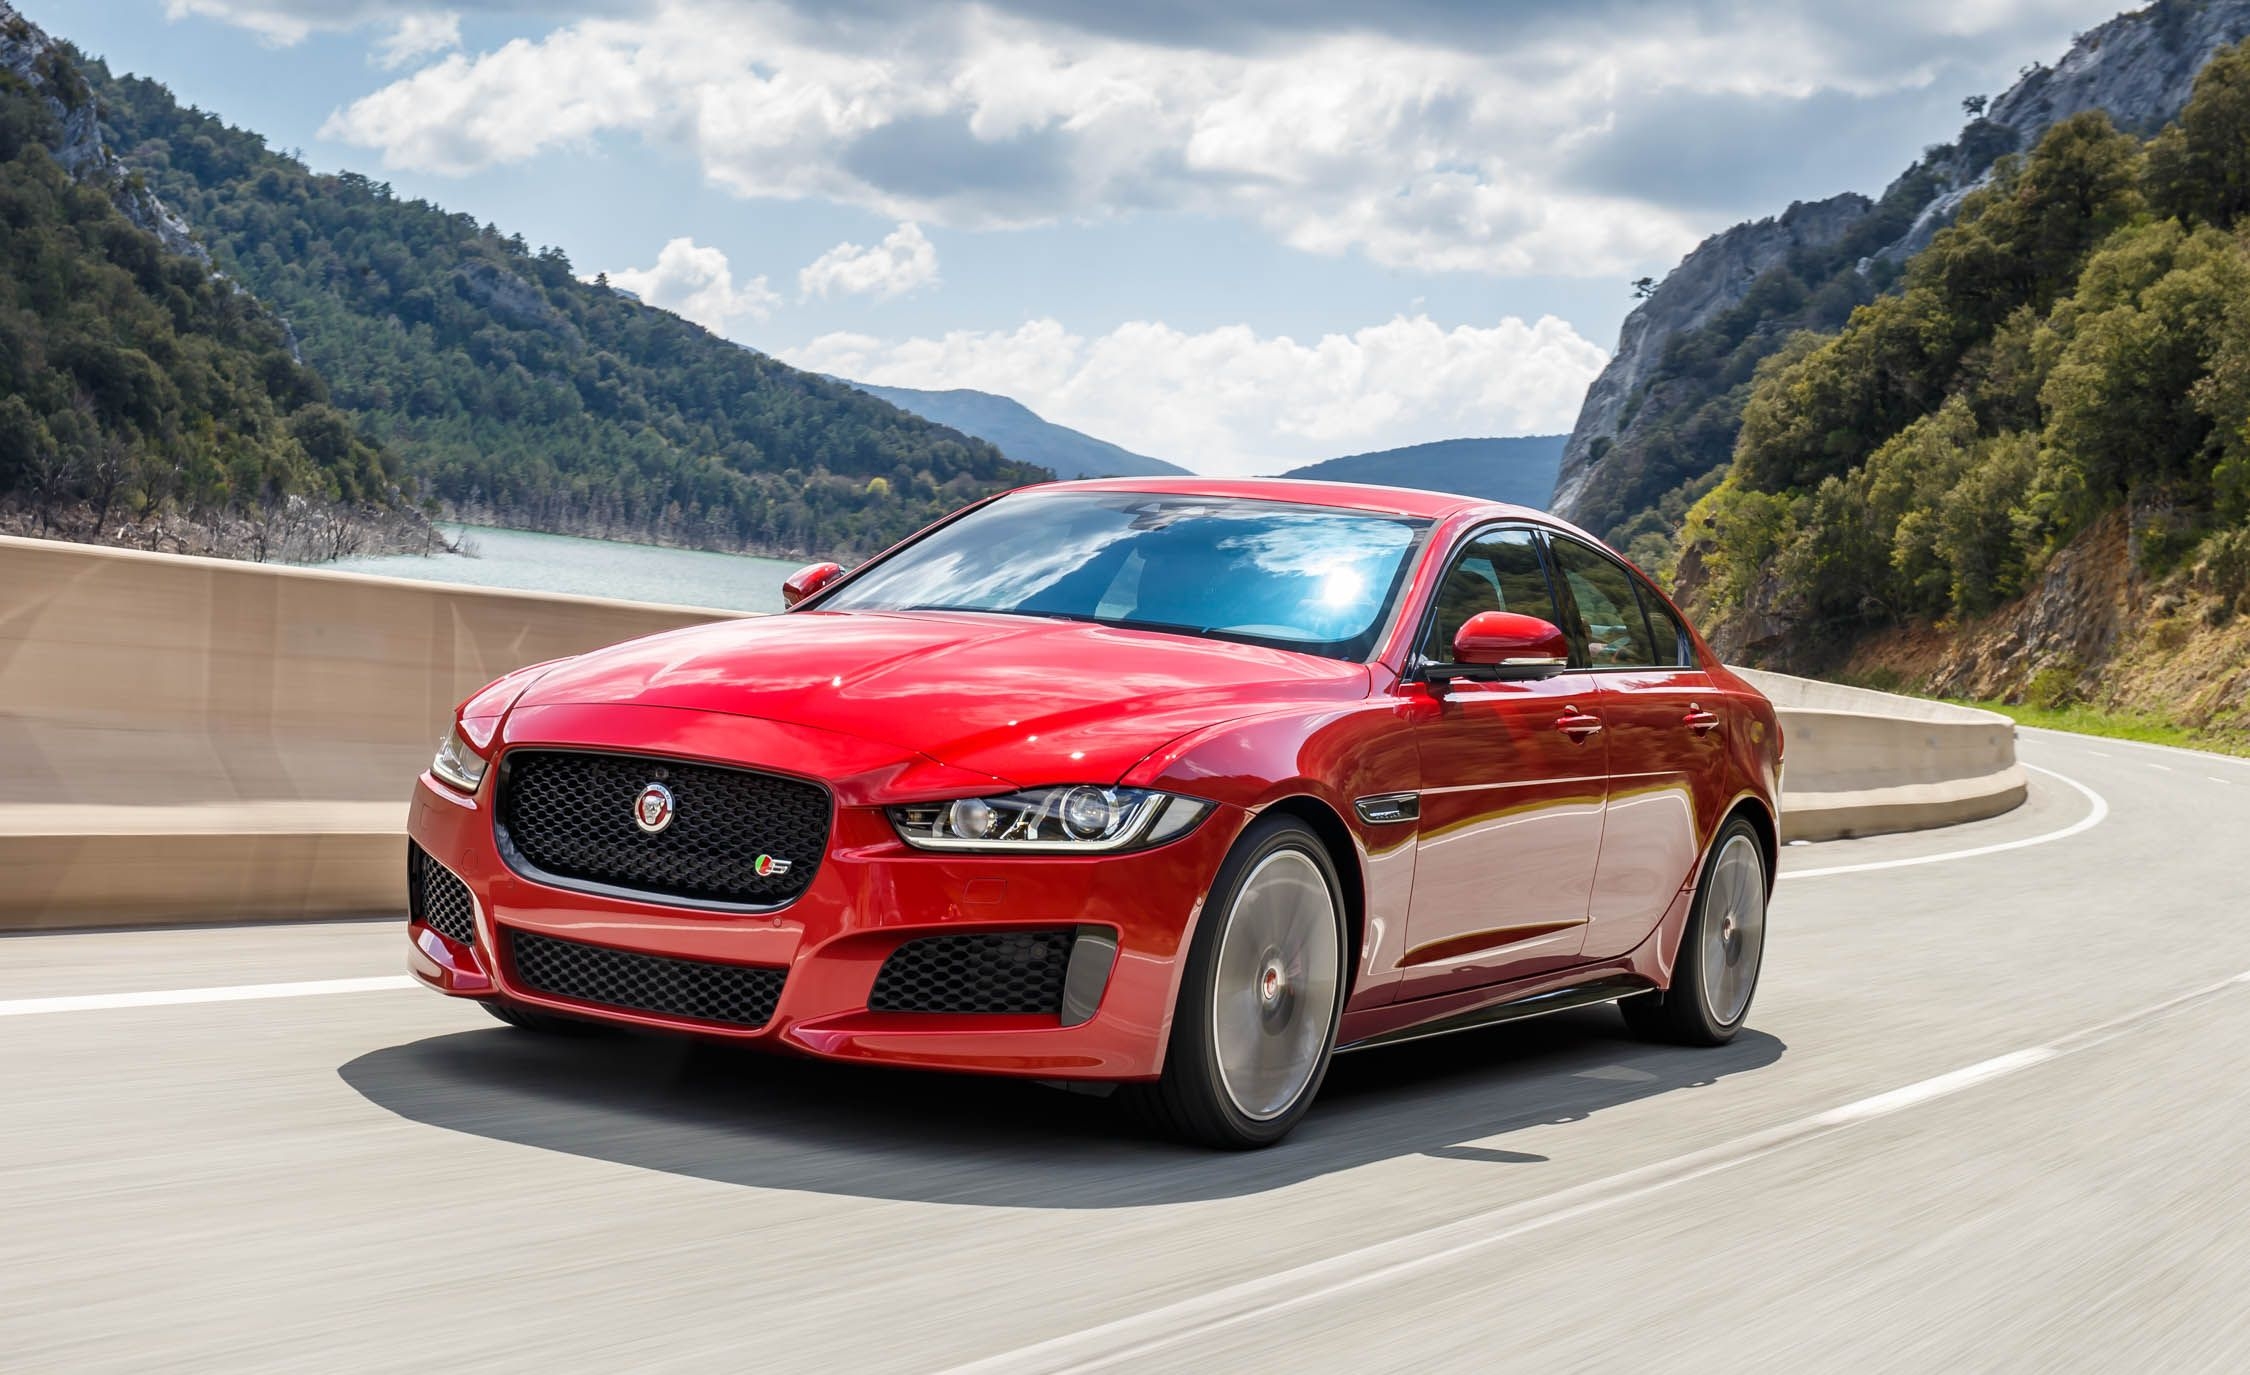 2018 Jaguar Xe Updated With New Engine Options – News – Car And Driver intended for 2018 Jaguar Xe Exterior and Interior Review2018 Jaguar Xe Release Date, Price and Review